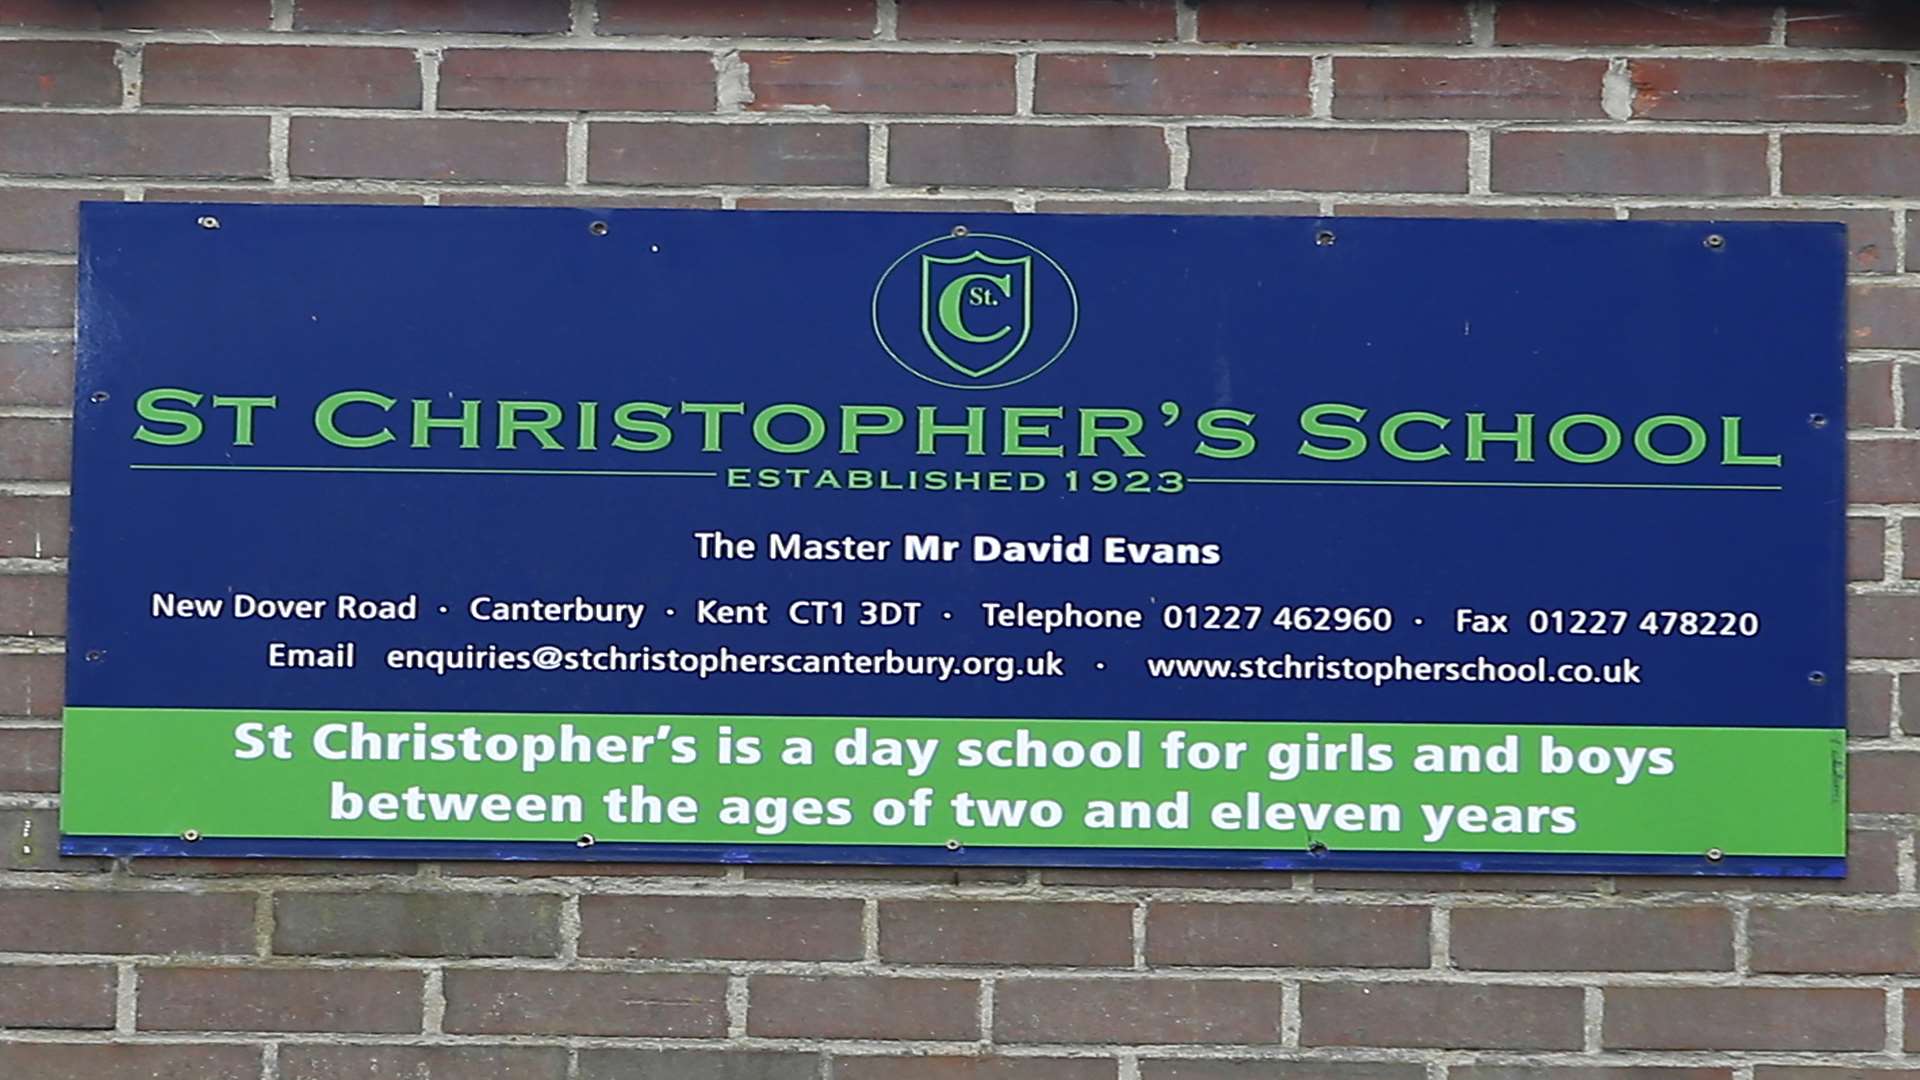 The sign outside St Christopher's school in Canterbury